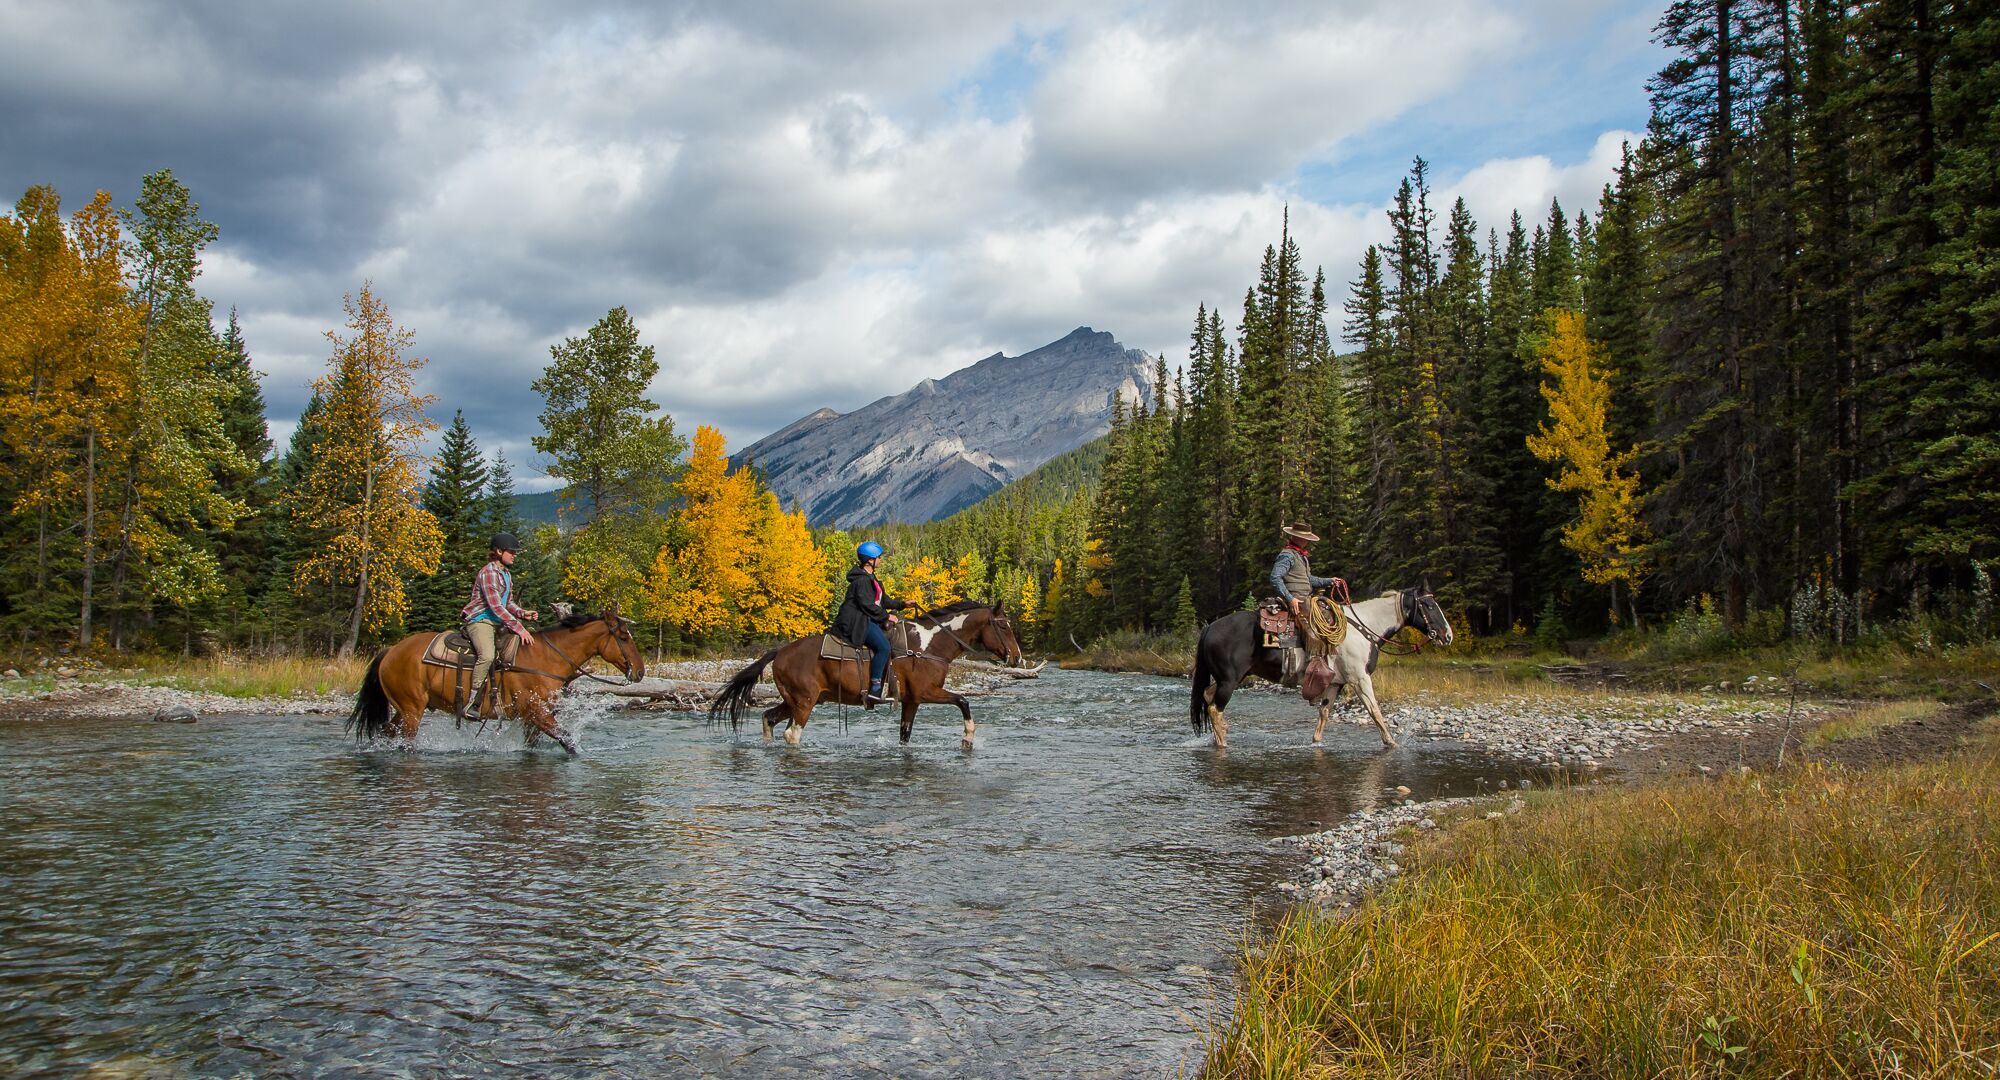 3 horses with riders crossing a stream. Trees with fall colours in background